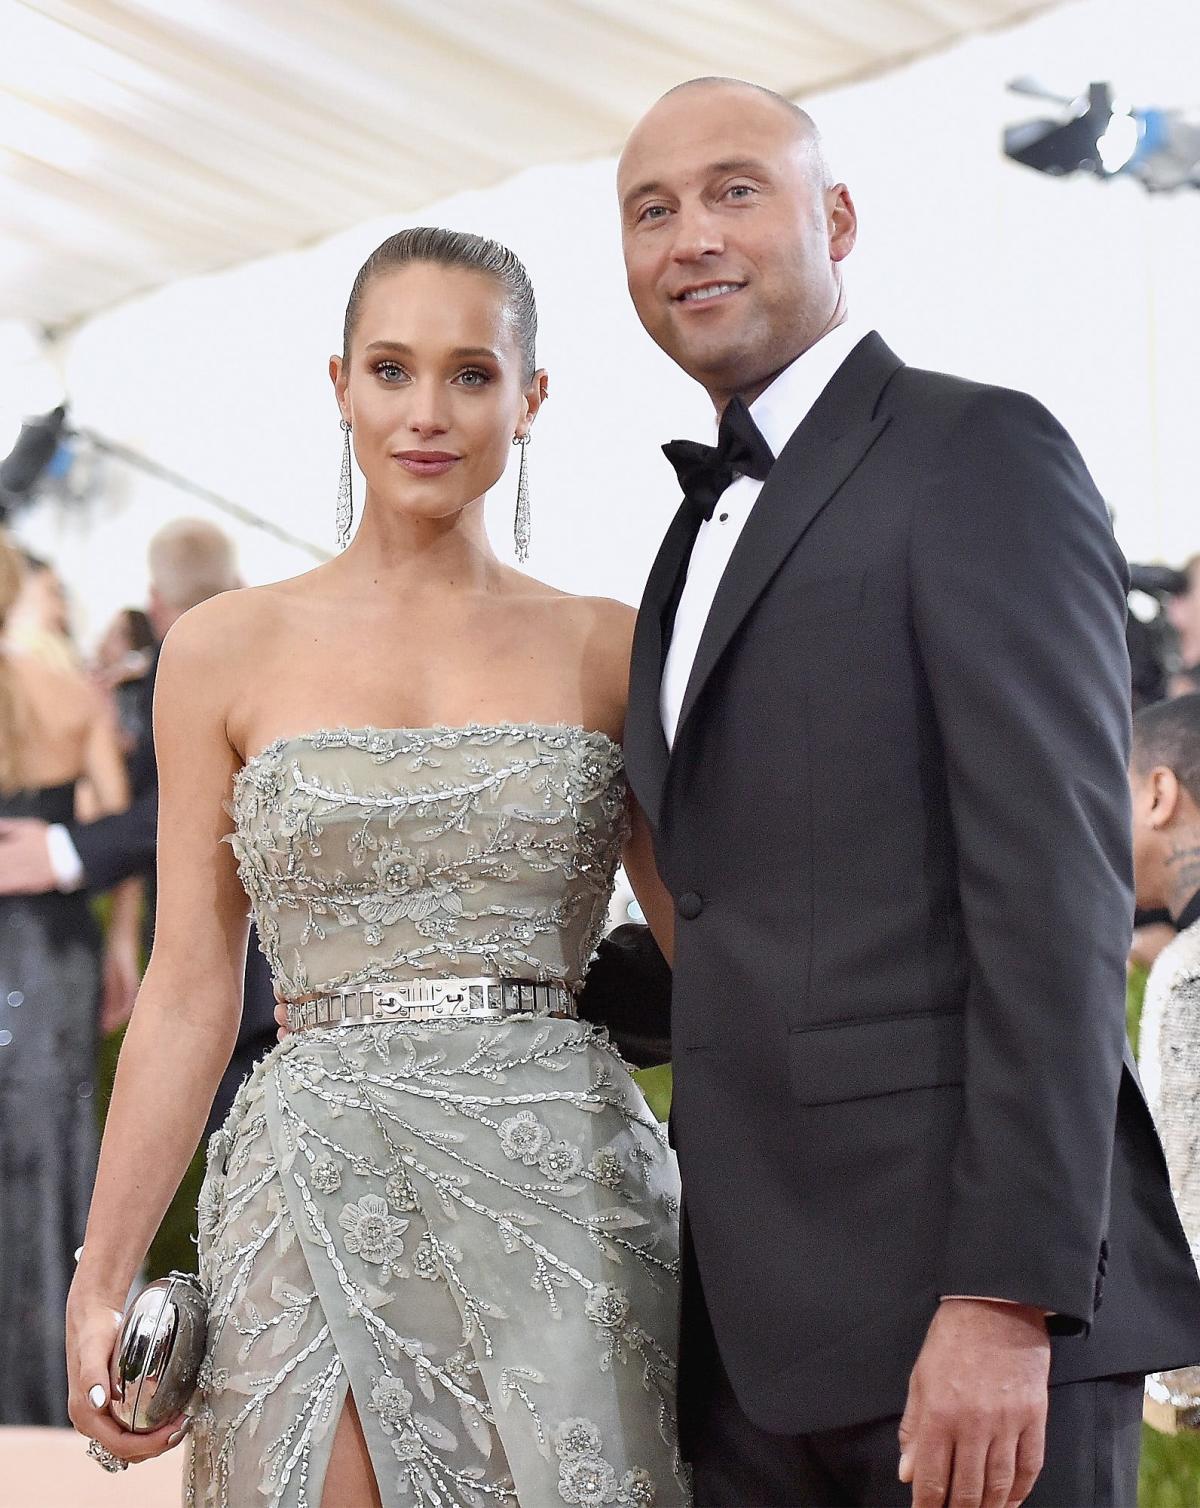 New York Yankees legend Derek Jeter and his wife, Hannah, welcome 1st child